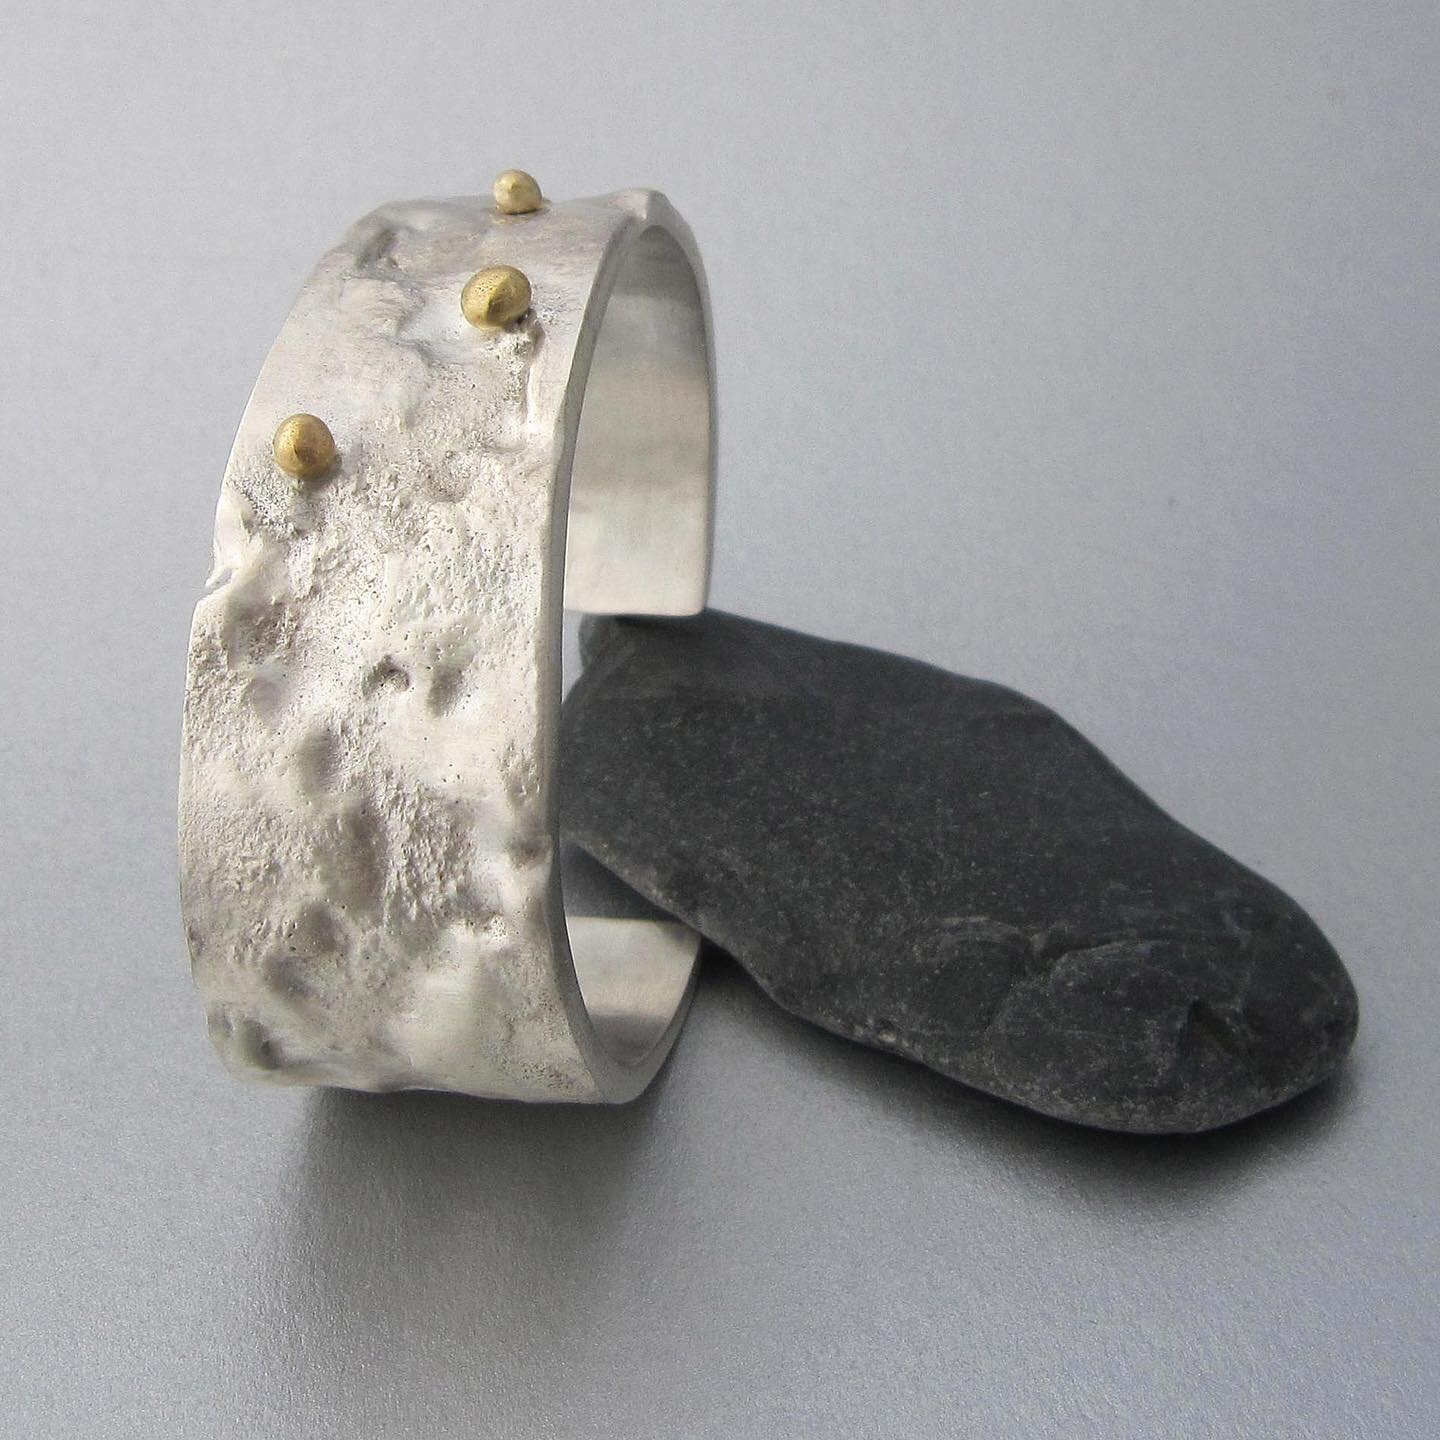 Relitto bianco (&quot;white wreck&quot; in English) is an one of a kind jewelry piece handcrafted in silver and solid 18k gold. Its design is inspired by a shipwreck found in the ocean

Image+design:&copy;maddalenabearzi